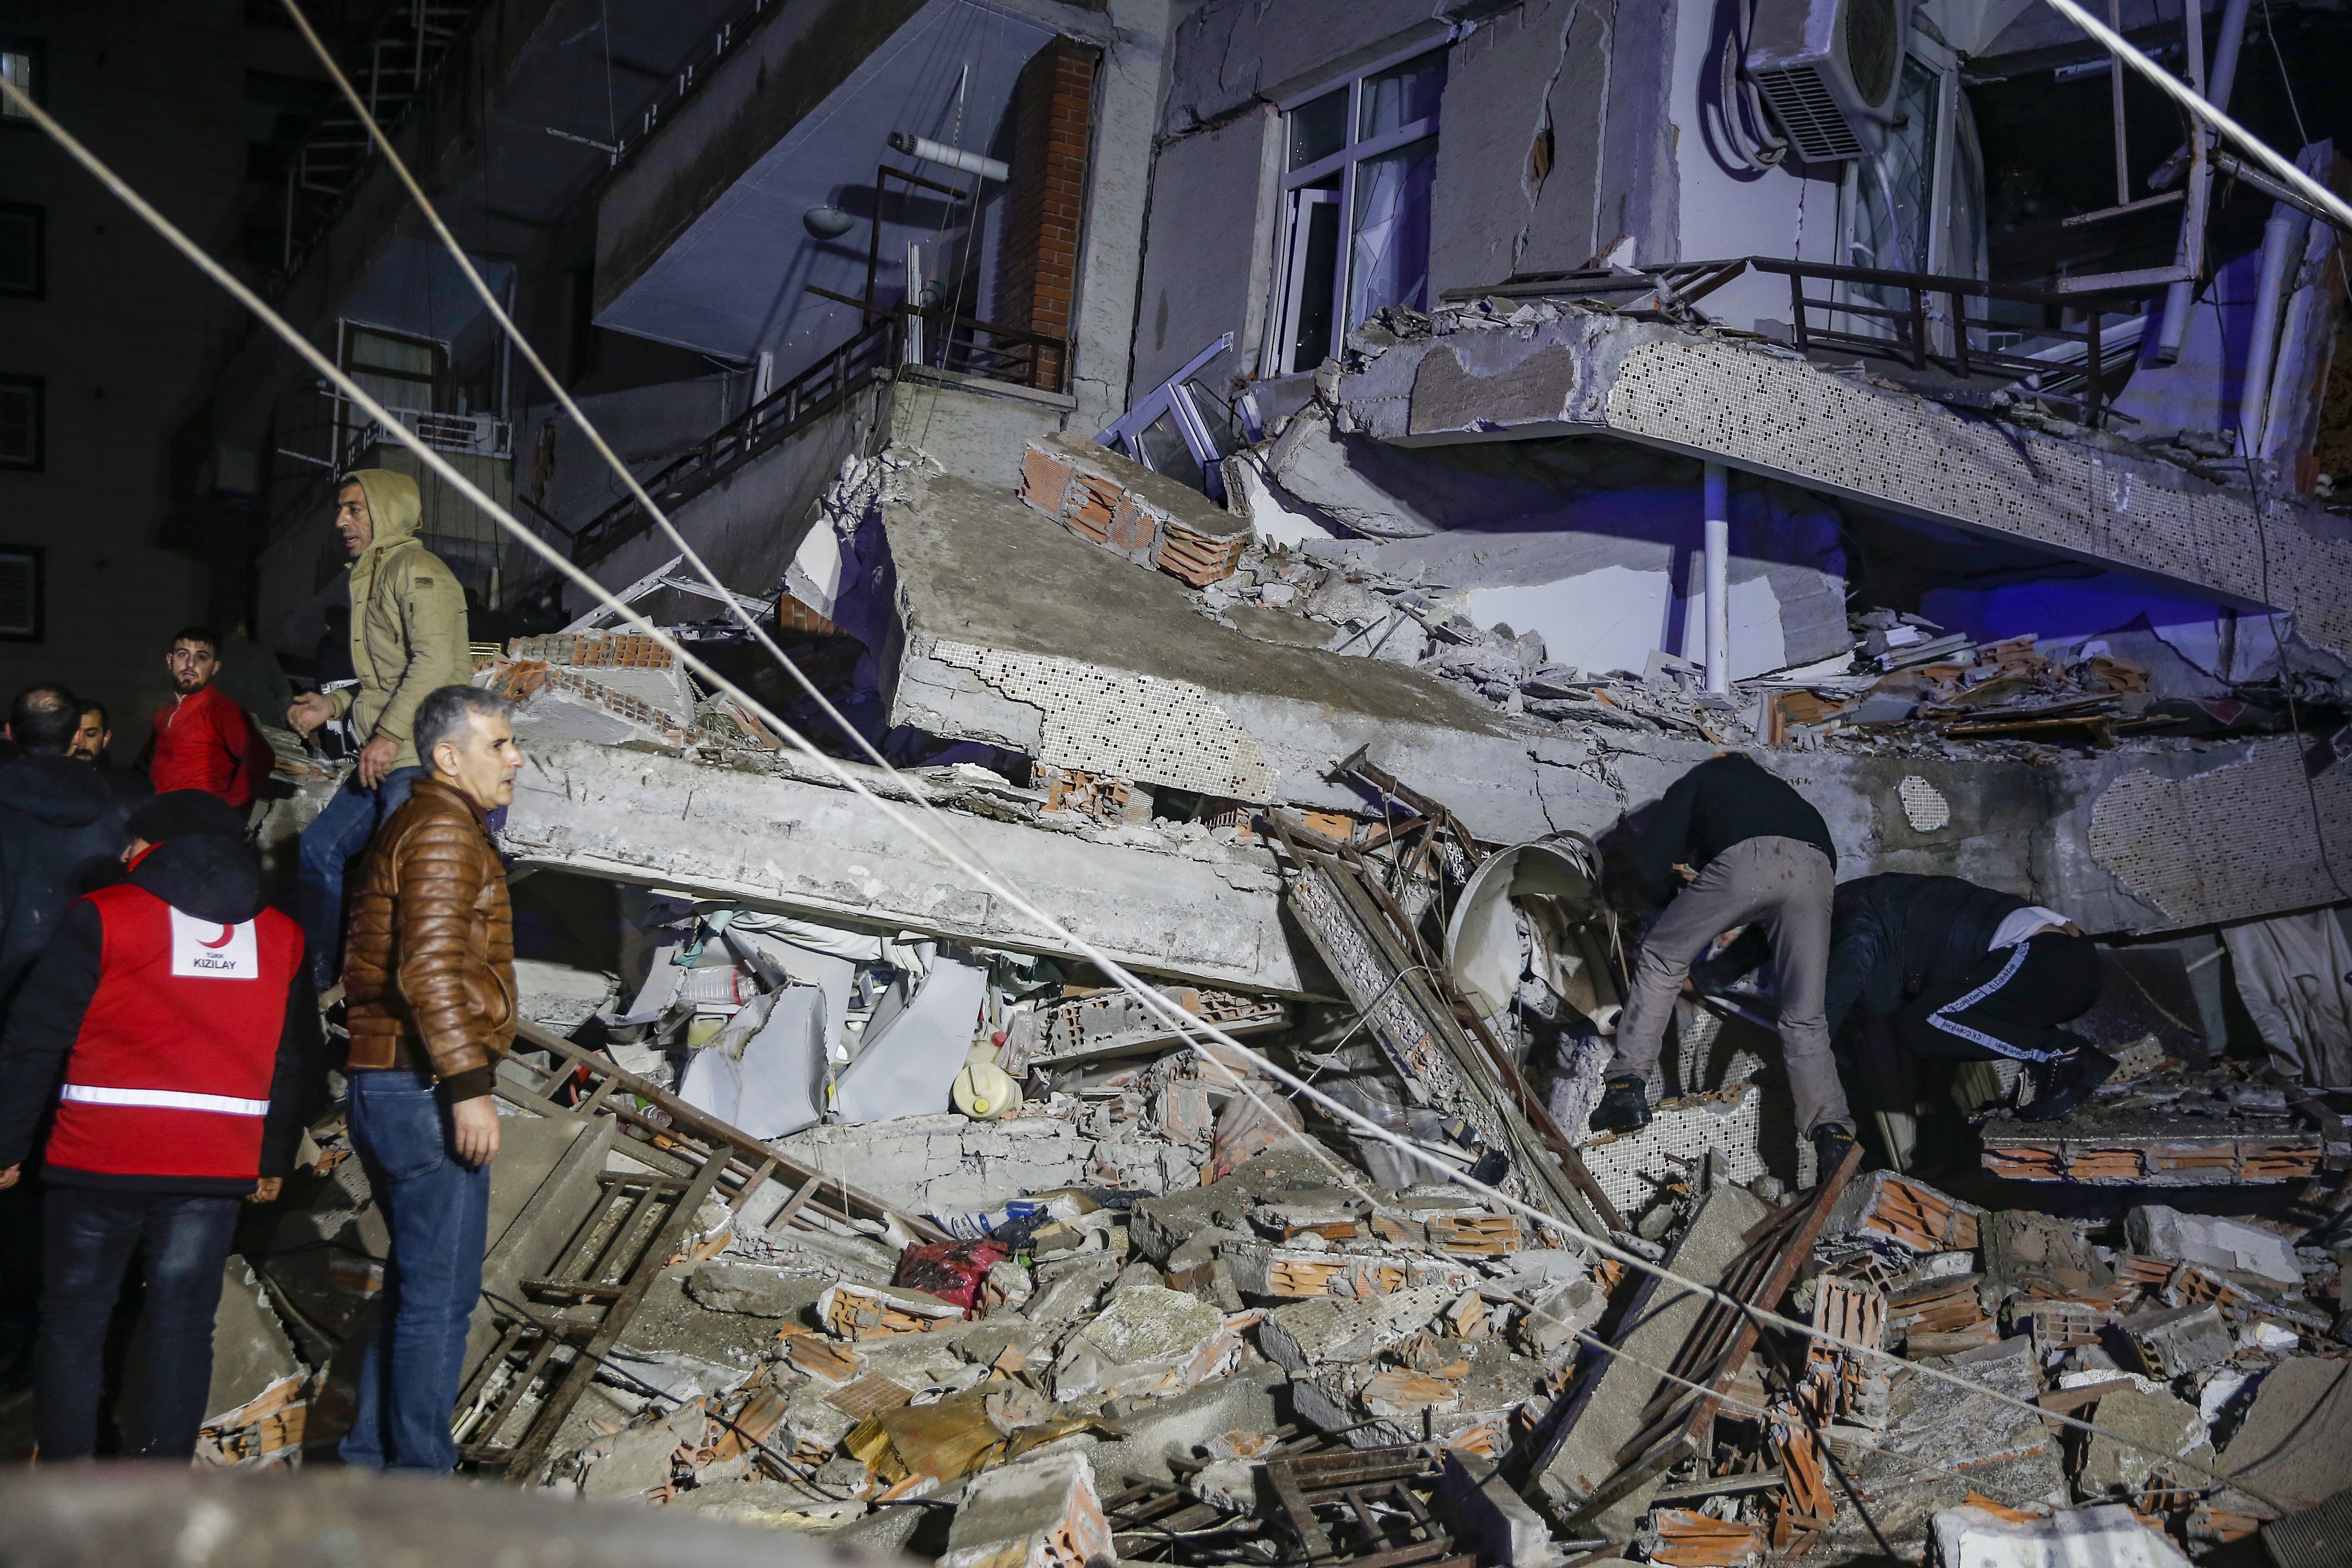  A view of destroyed building after earthquakes jolts Turkiye's provinces, on February 6, 2023 in Diyarbakir, Turkiye. 